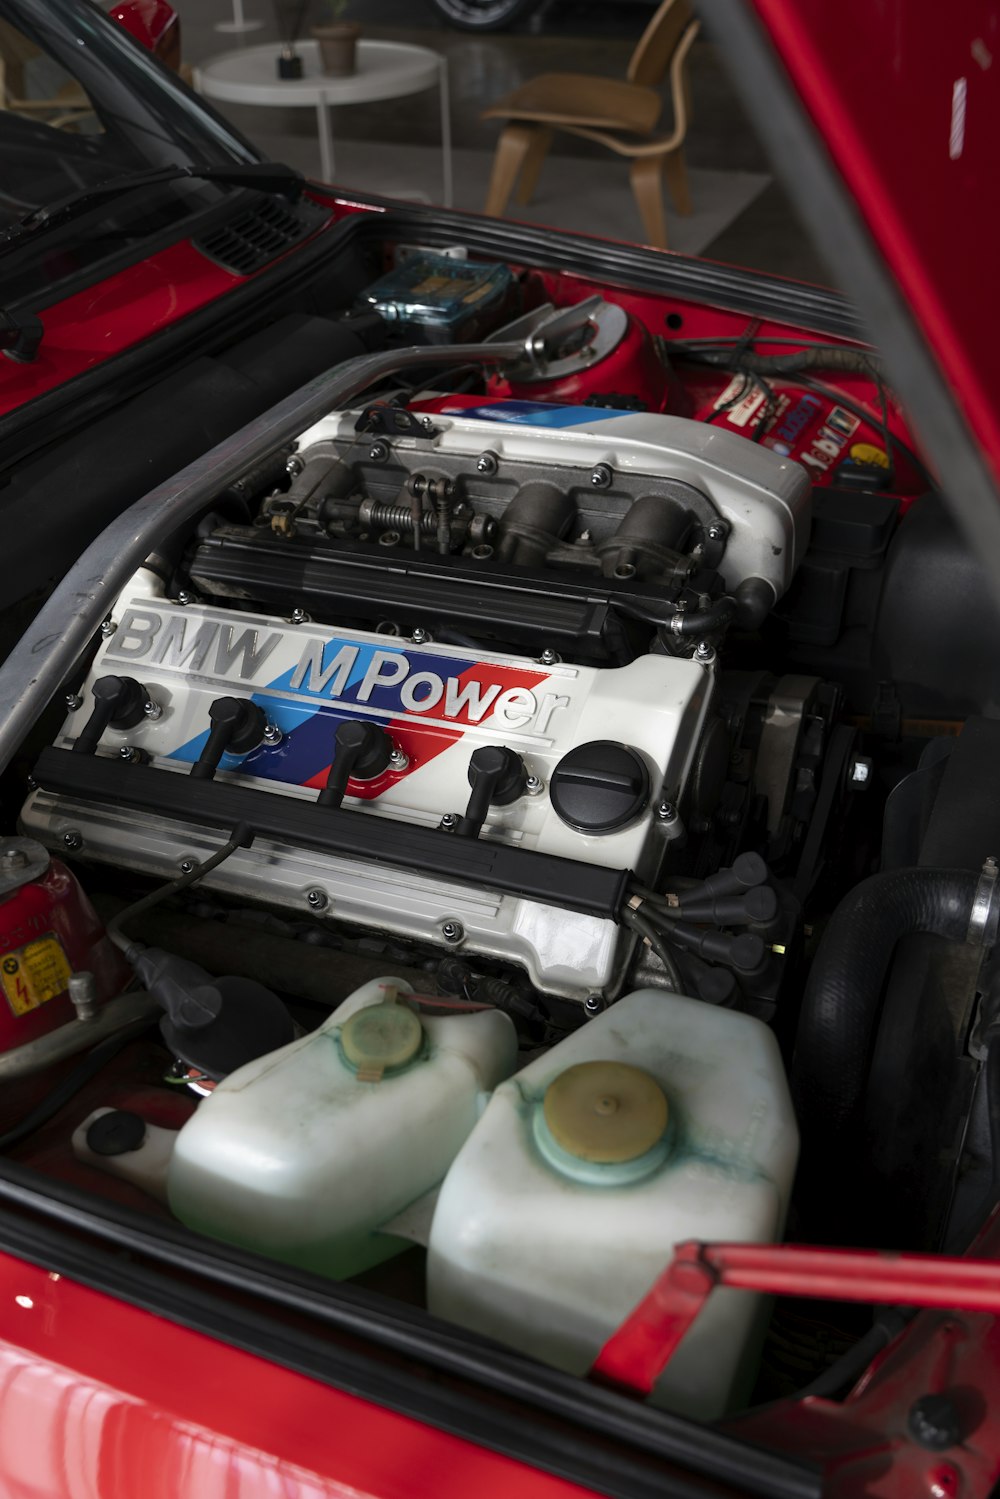 the engine compartment of a red sports car